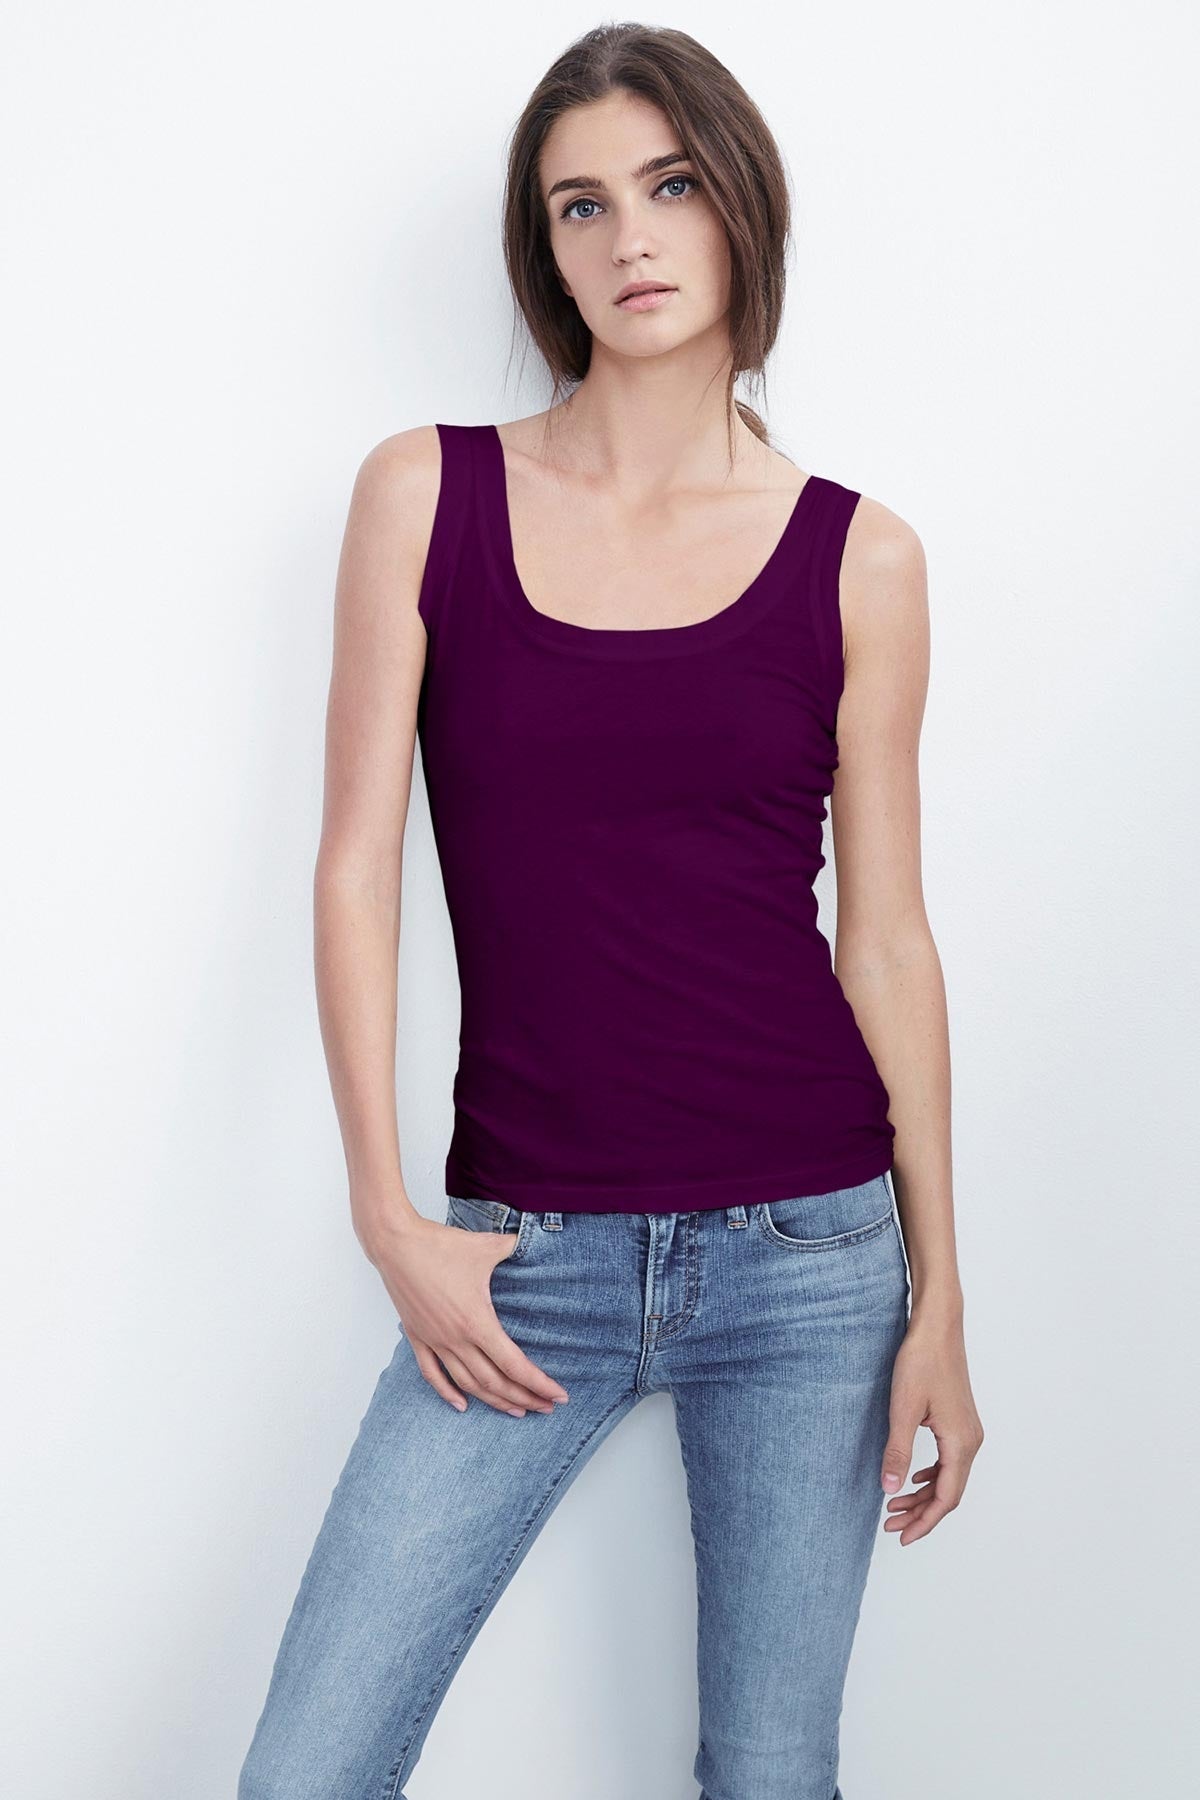 A woman wearing a MOSSY GAUZY WHISPER FITTED TANK by Velvet by Graham & Spencer and jeans.-23854475280577